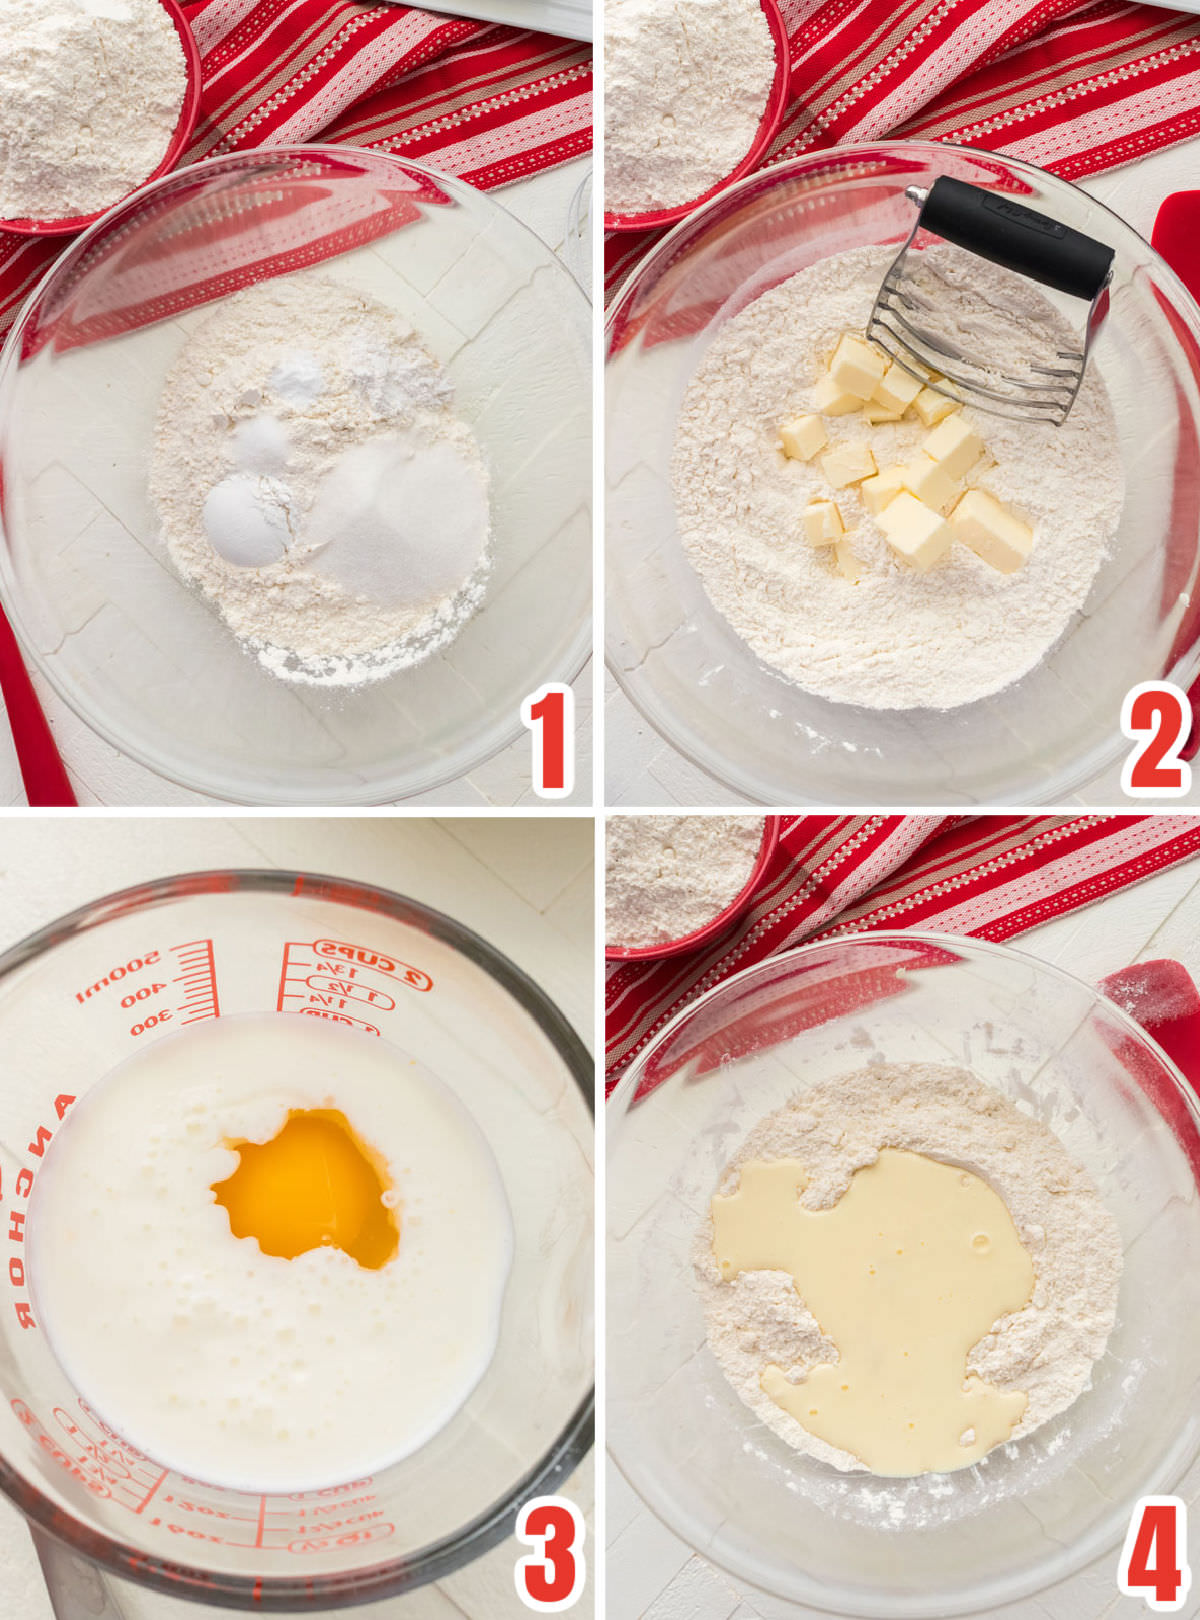 Collage image showing the steps for making the biscuit dough.